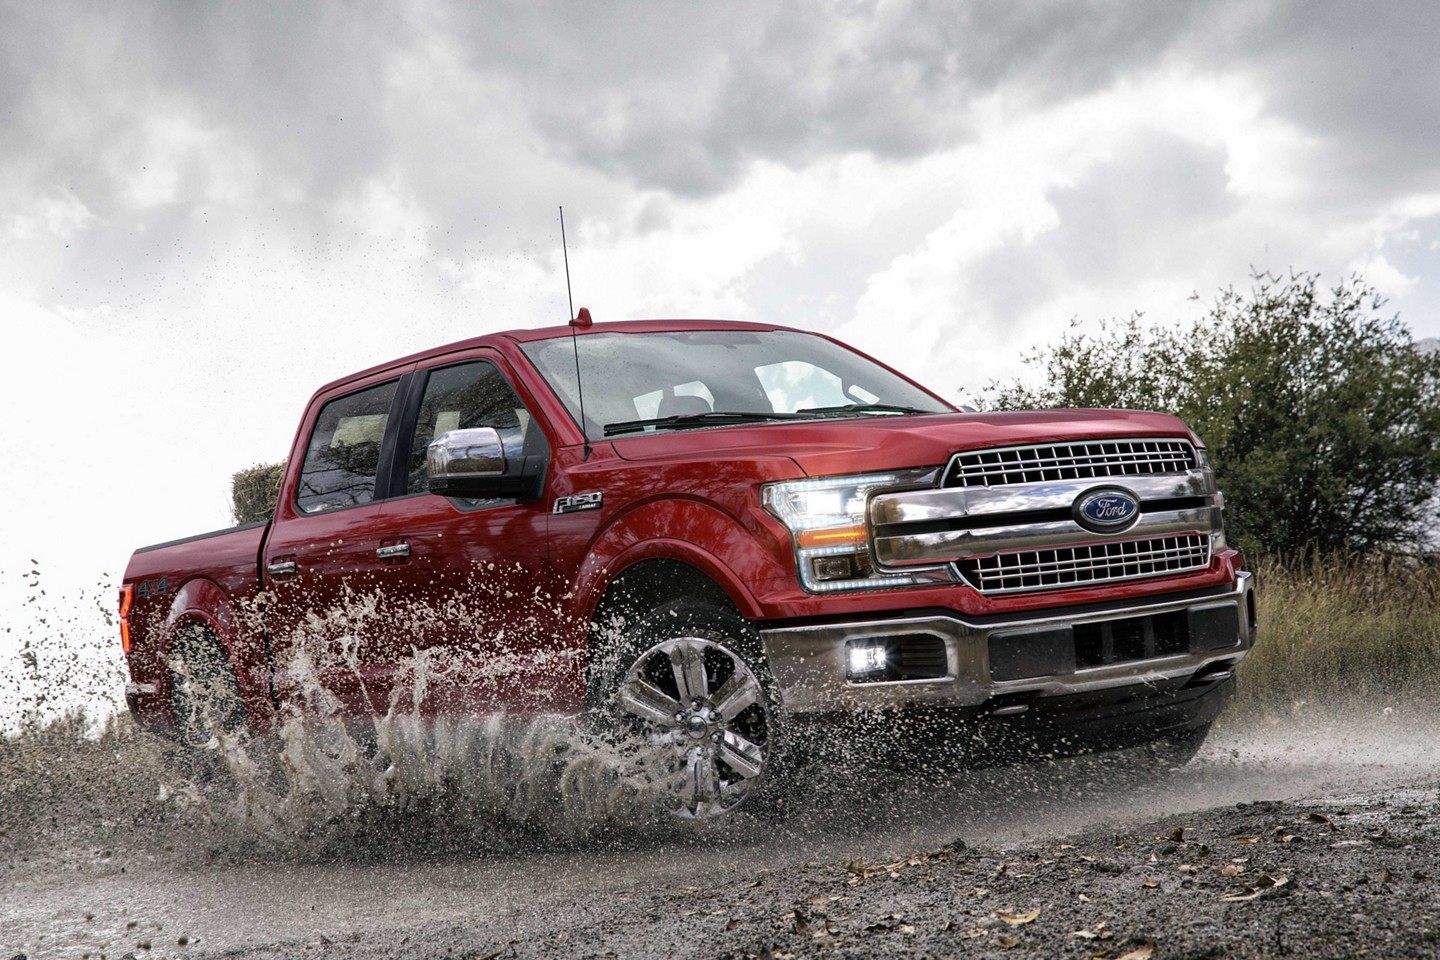 2019 Ford F-150 Red Exterior Side View Off-Road Picture.jpeg